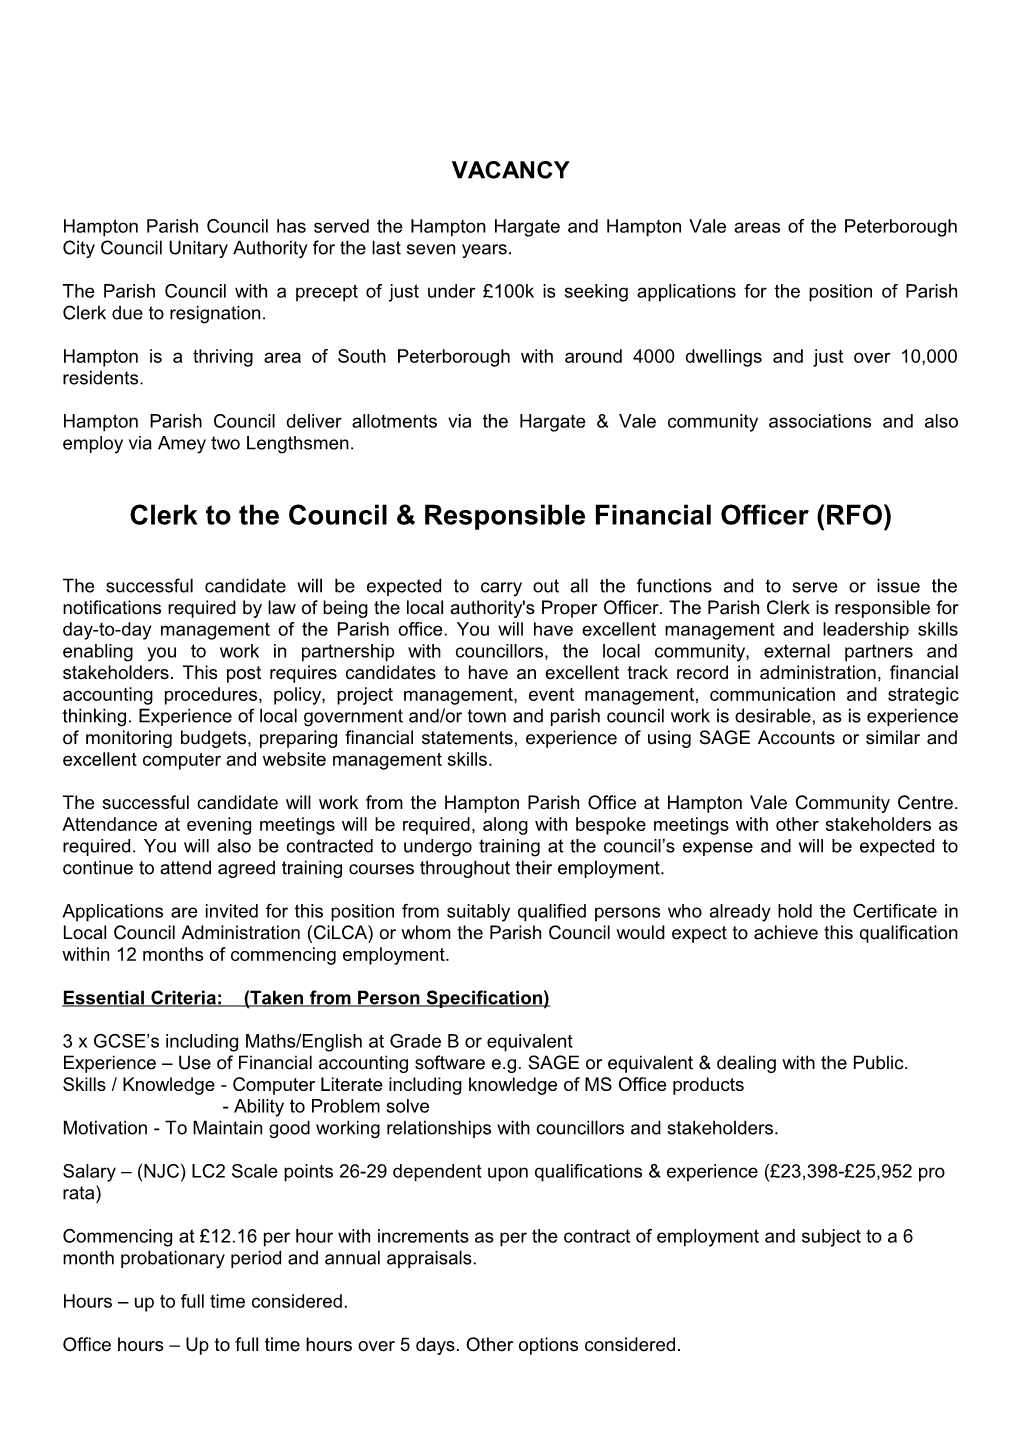 Clerk to the Council & Responsible Financial Officer (RFO)